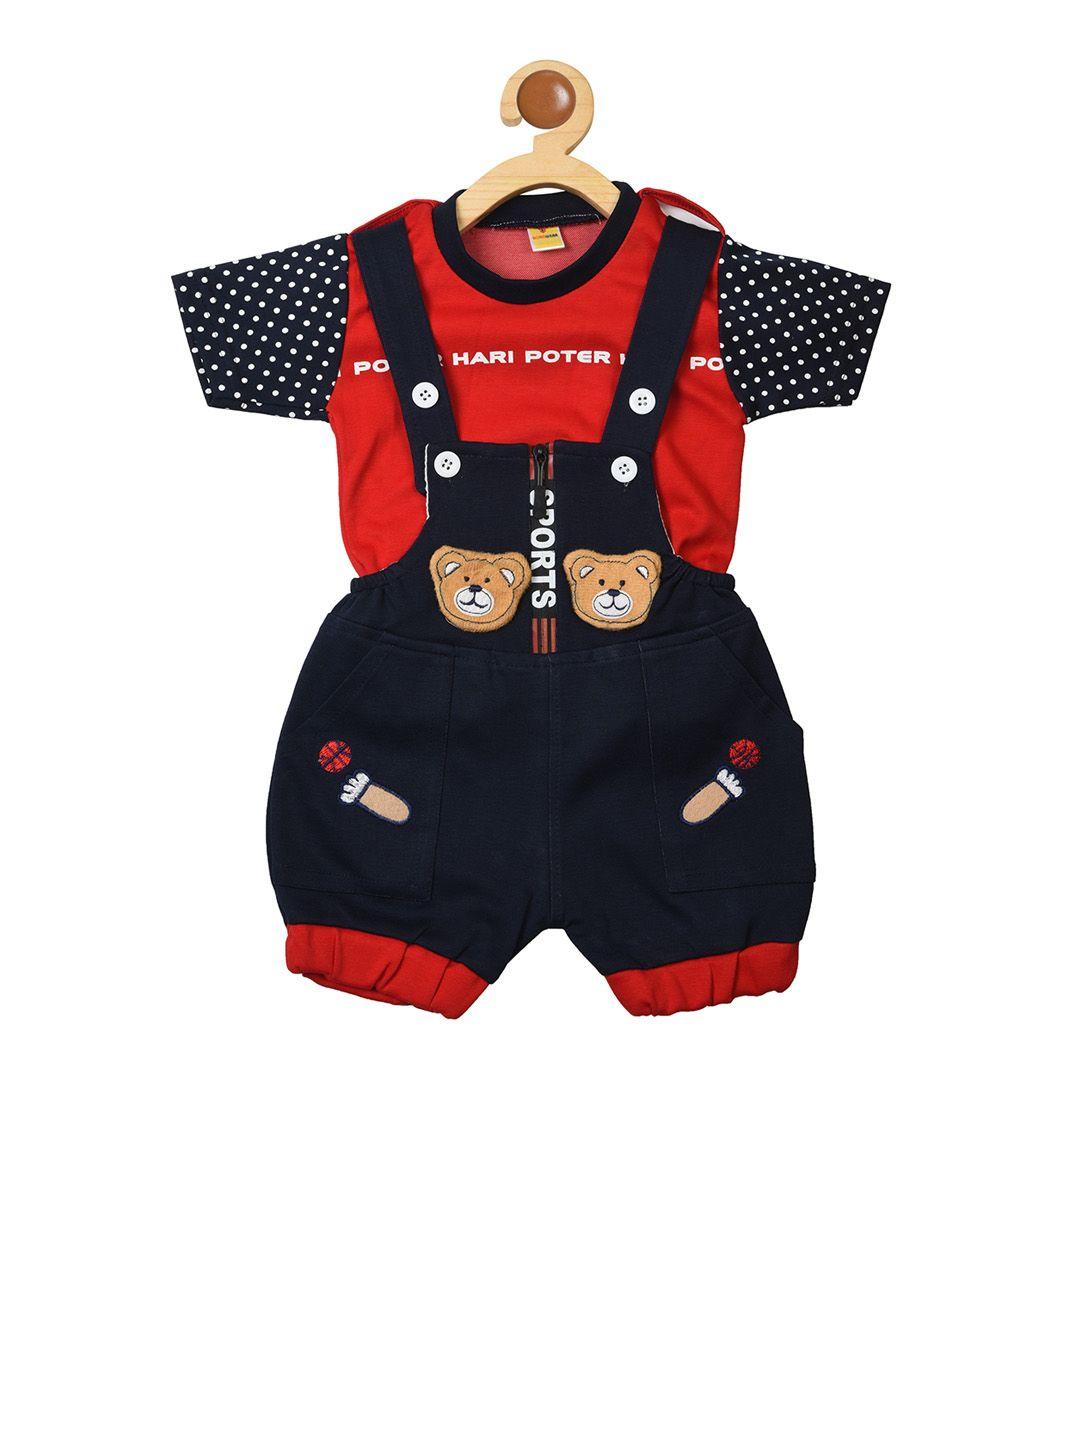 born wear kids navy blue & red solid dungaree with red t-shirt